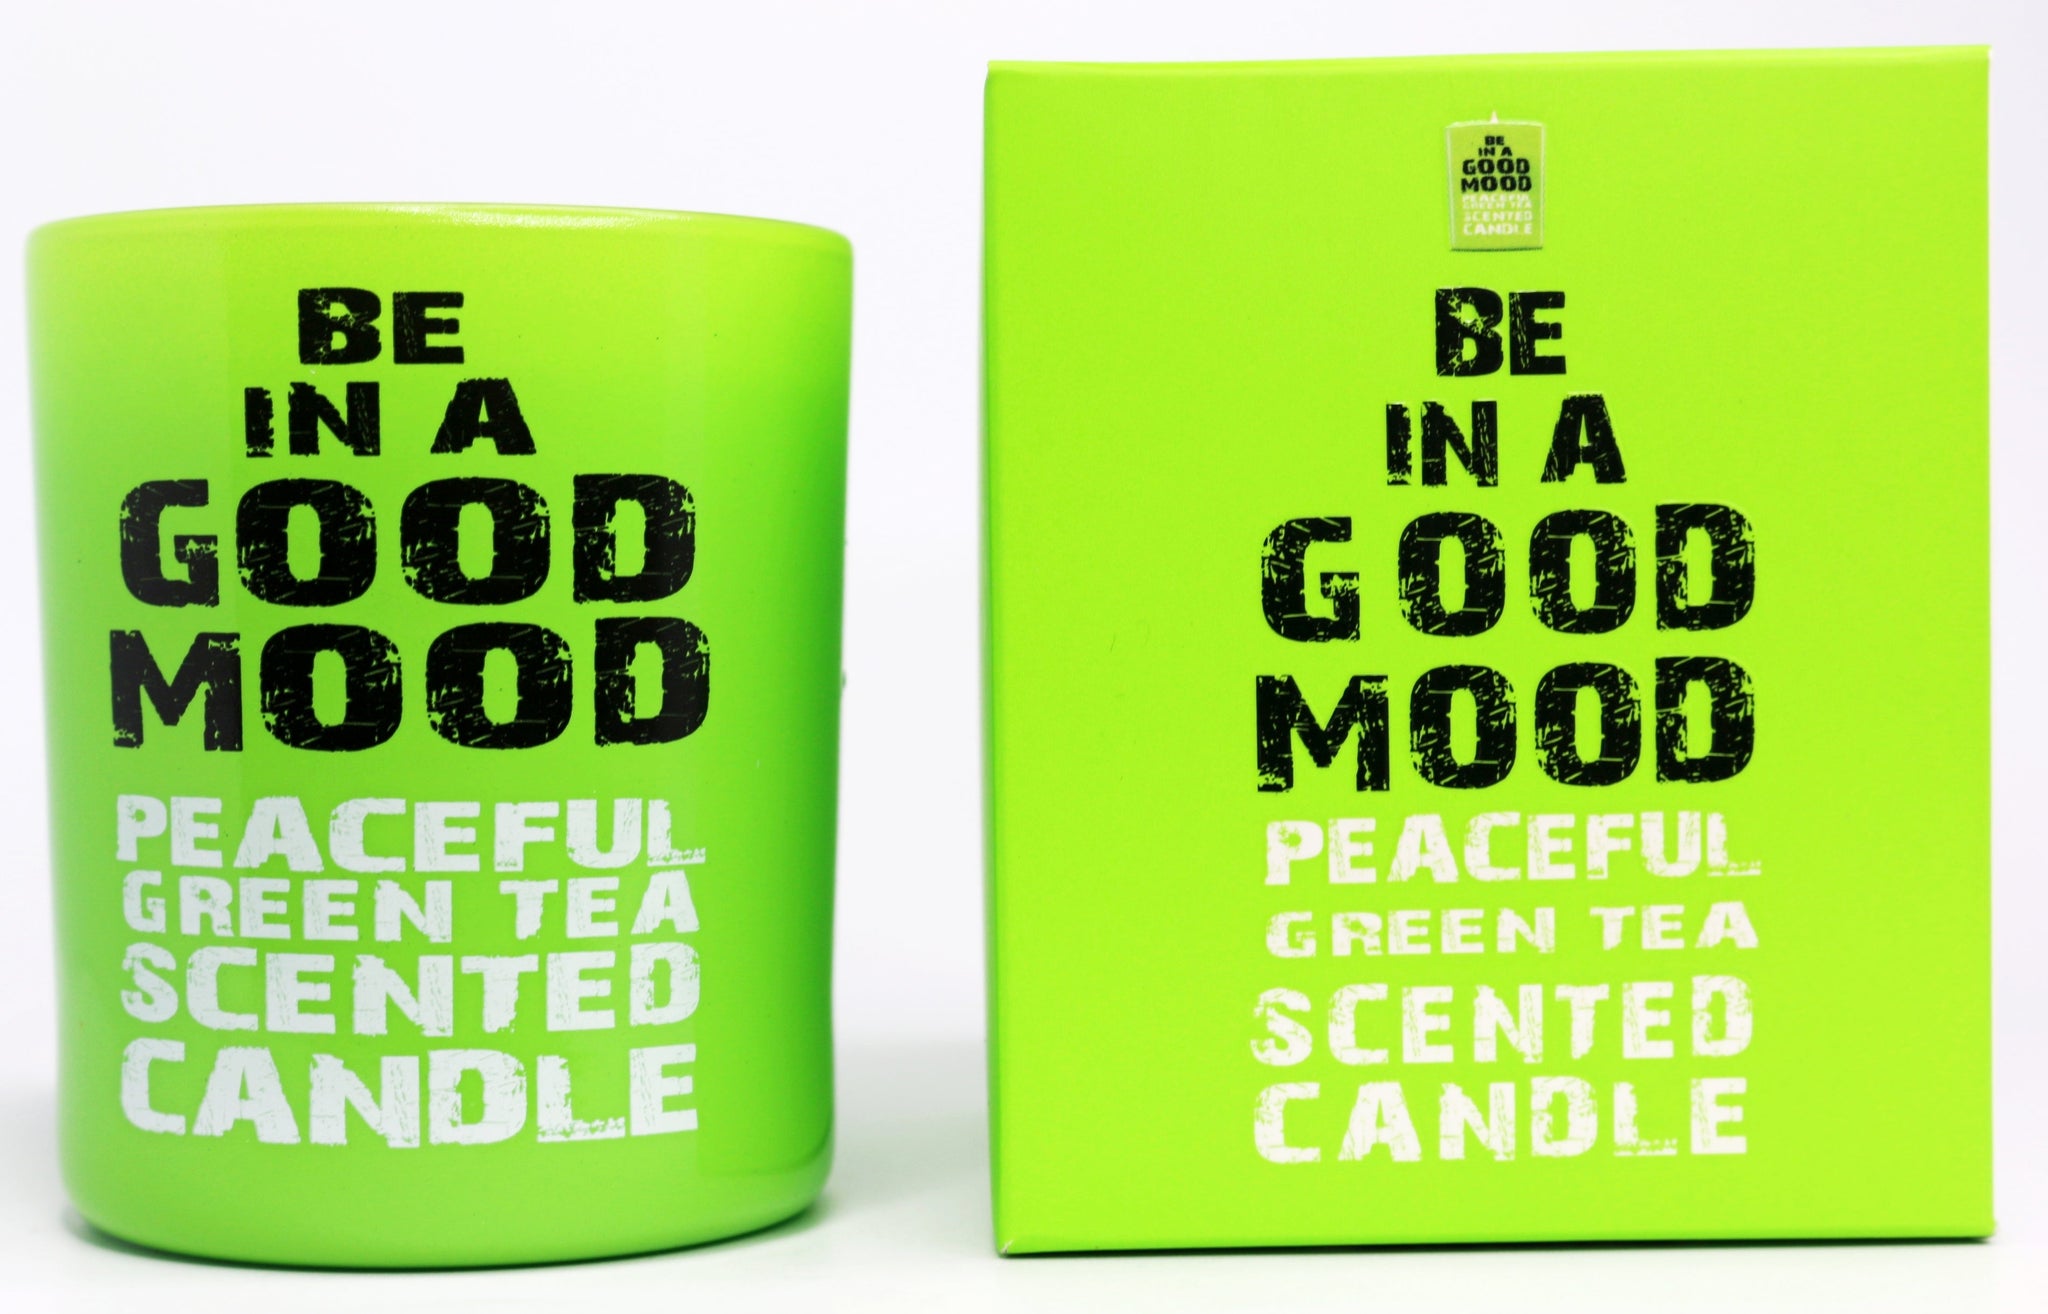 Be in a Good Mood Peaceful Green Tea Scented Candle